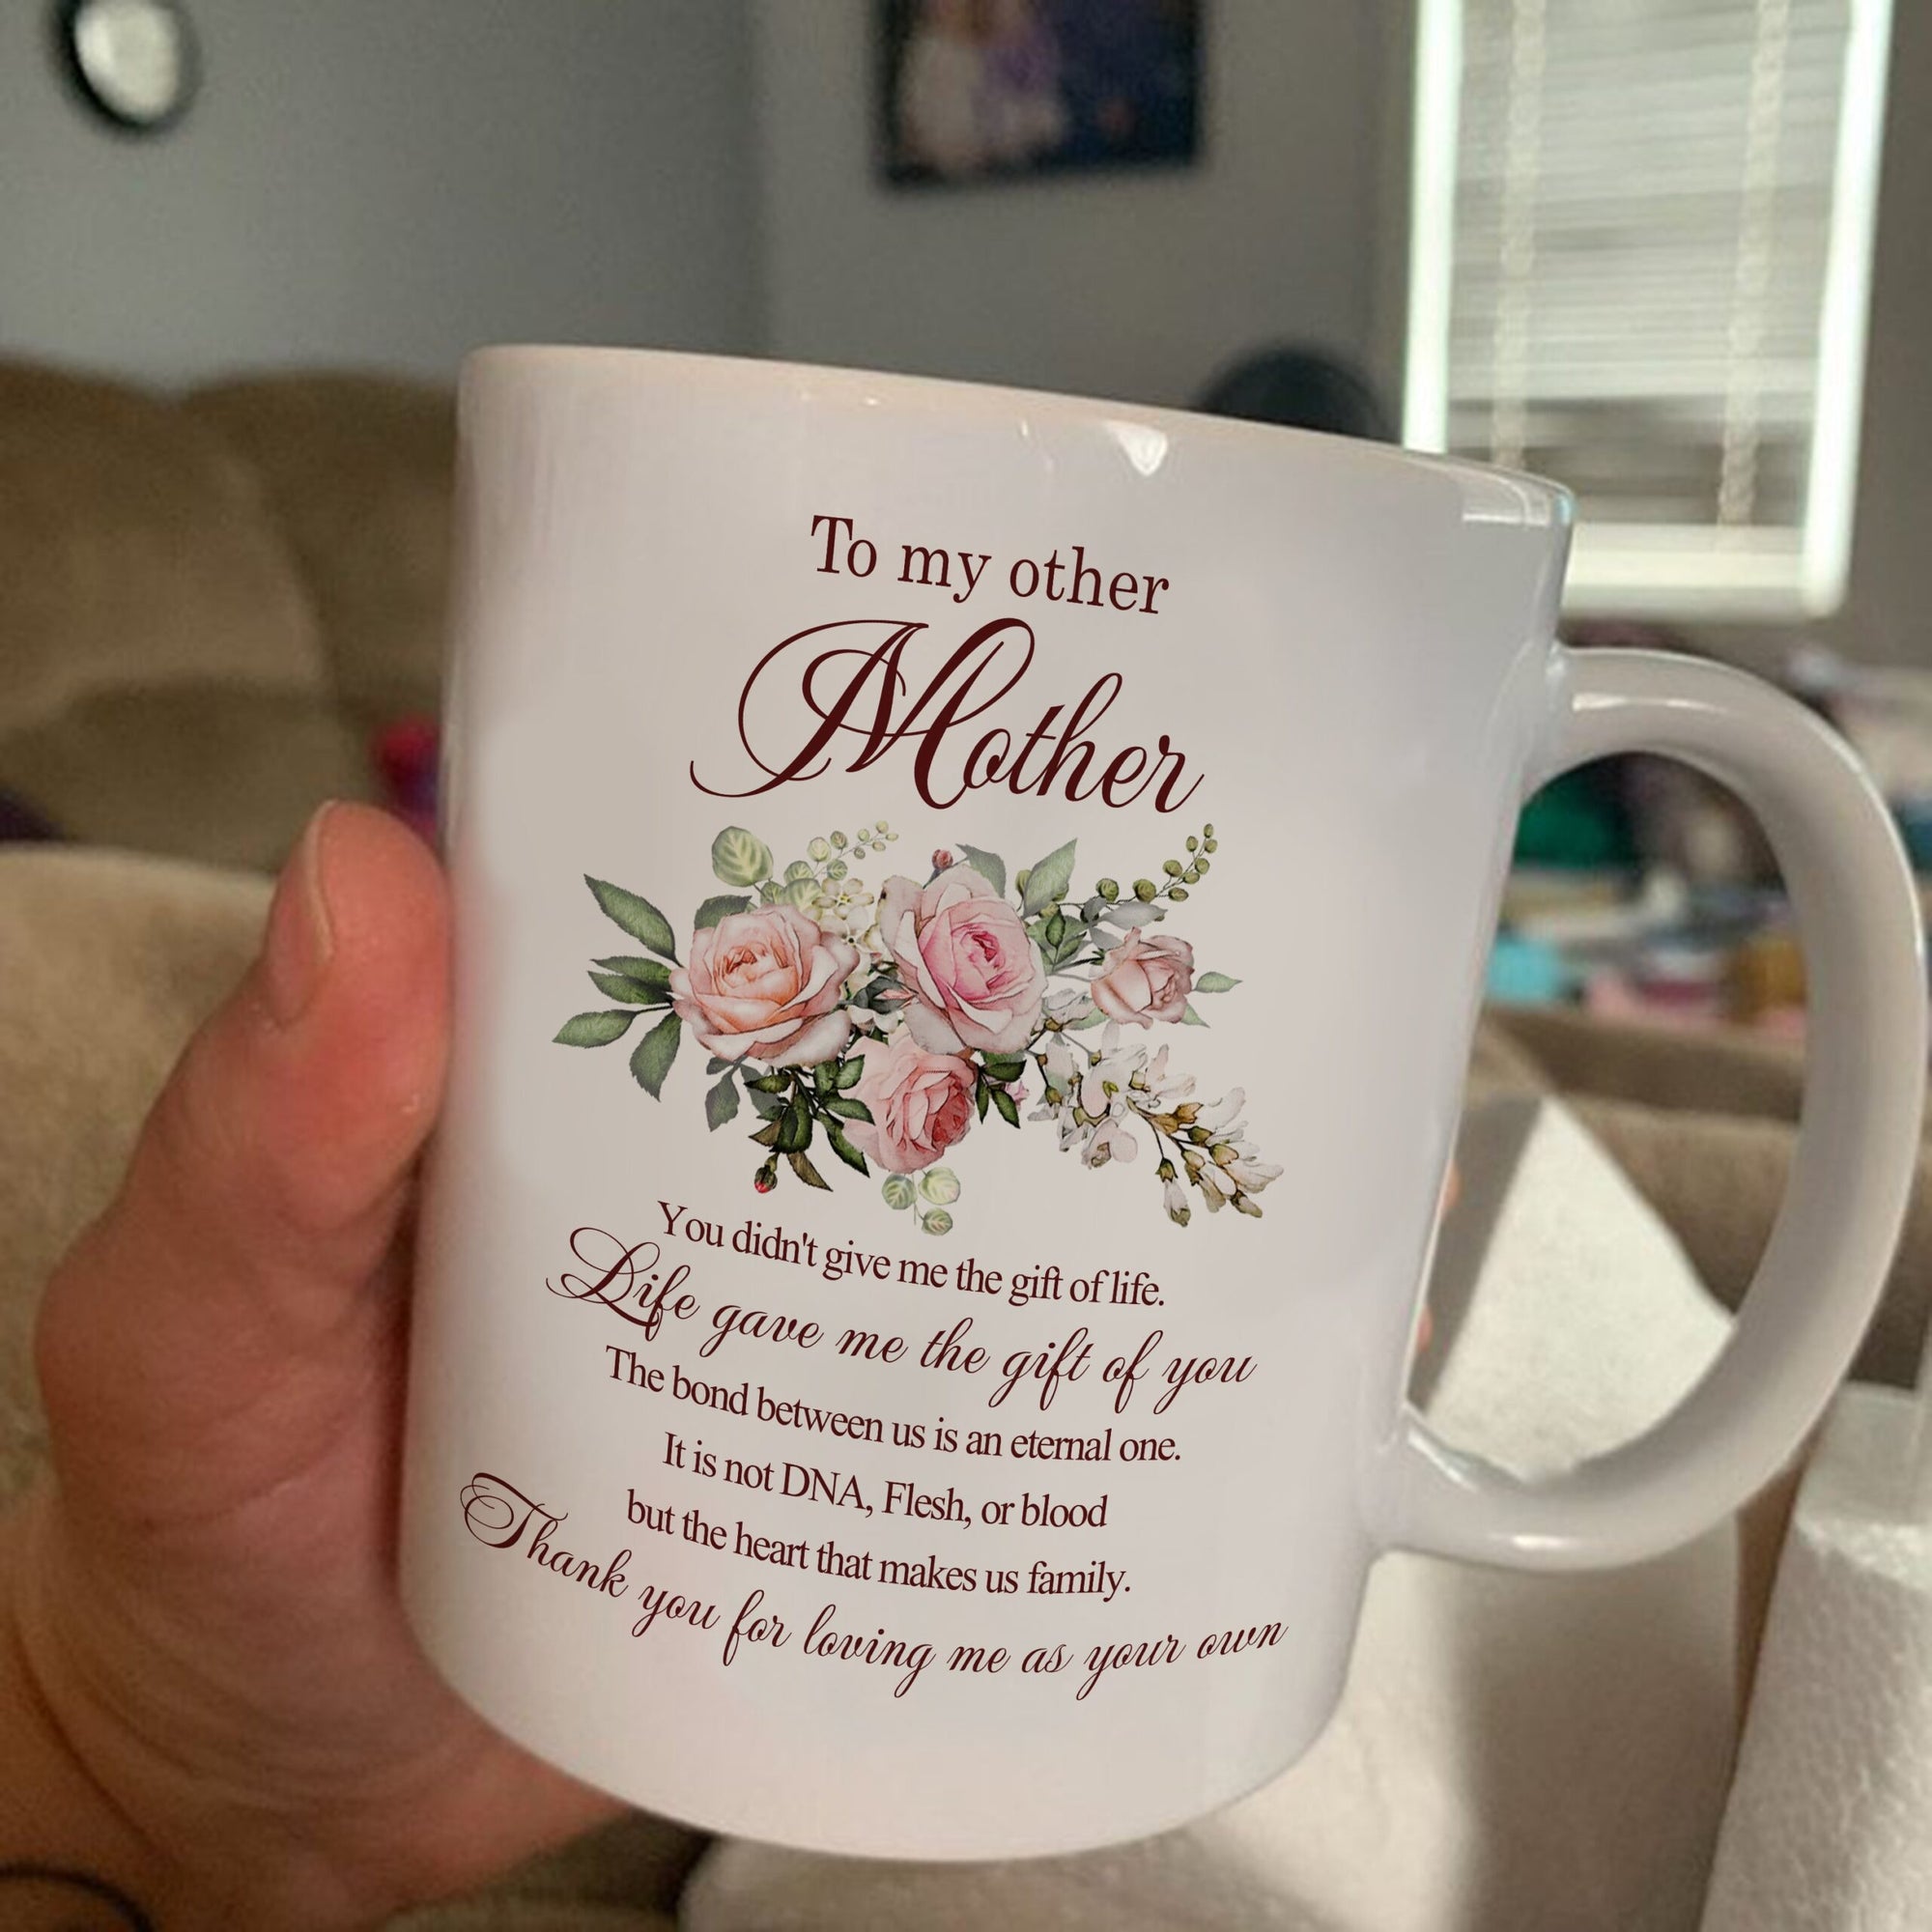 to My Stepped Up Mom Mug Thanks You for Being The Mum Didnt Have Be Flowers Happy Mothers Day Women Present Step Stepmother on Mother Birthday